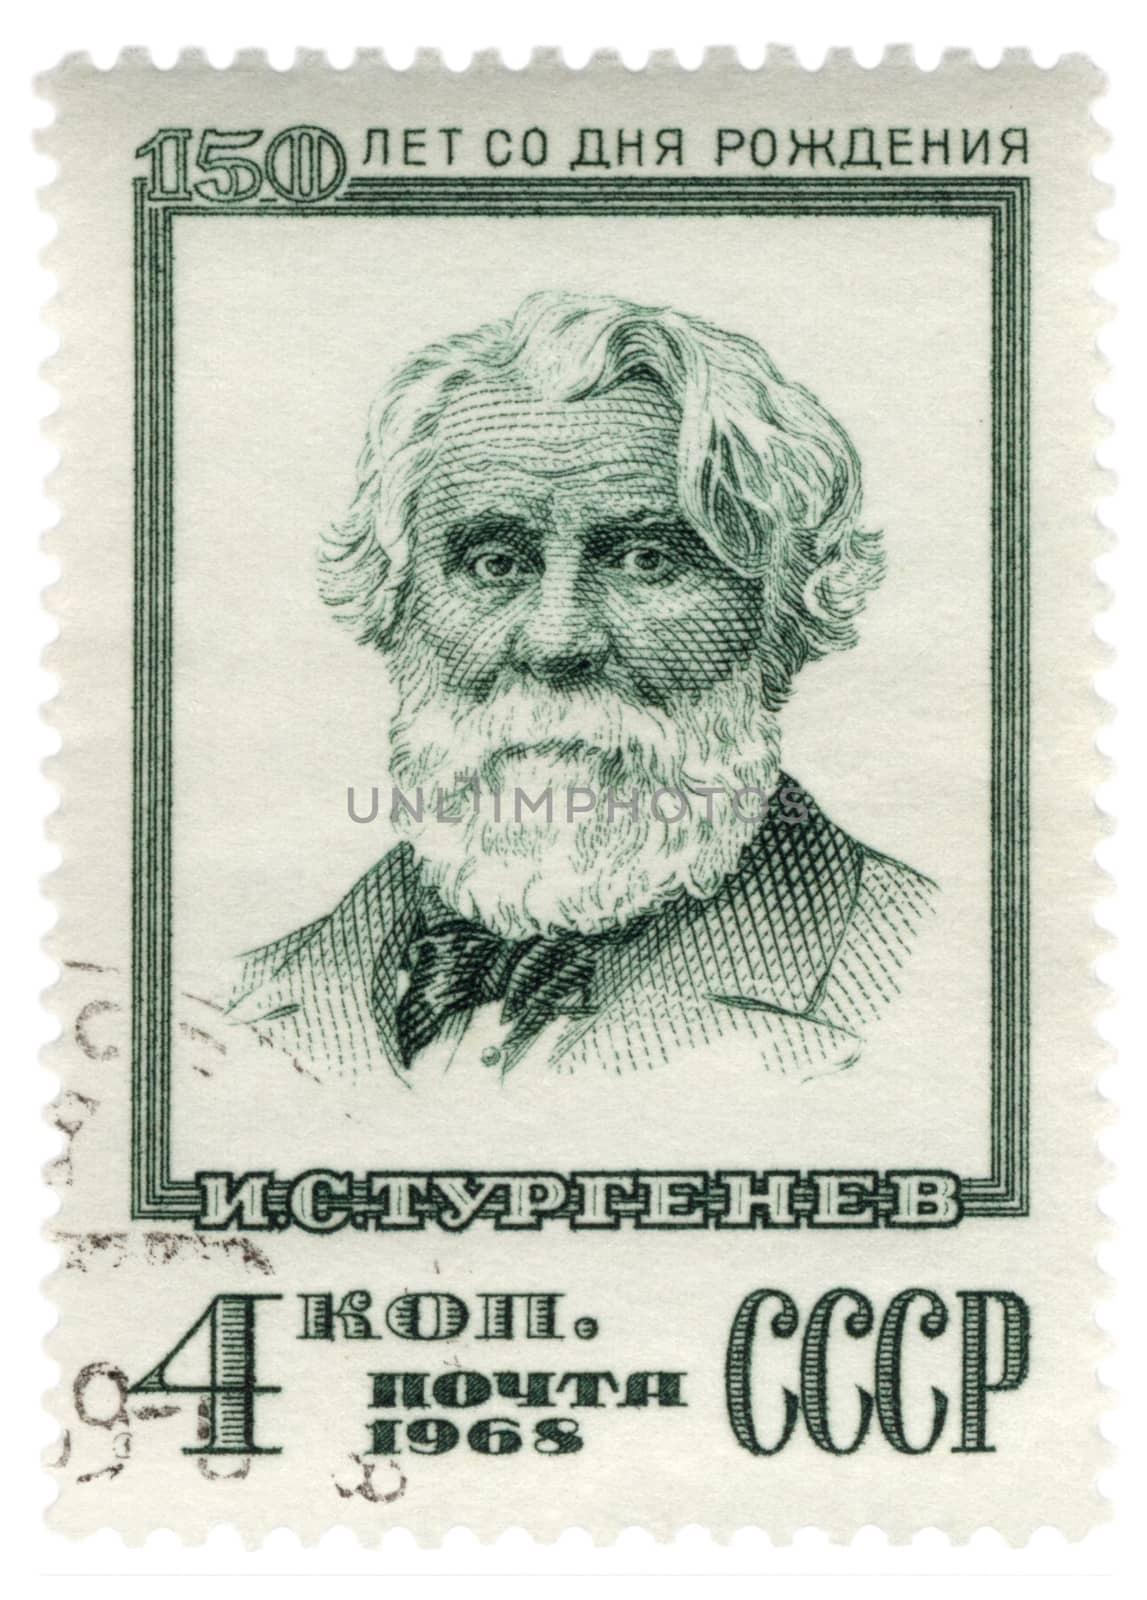 USSR - CIRCA 1968: post stamp printed in USSR (Russia) and shows portrait of russian writer Ivan Turgenev (1818-1883), circa 1968